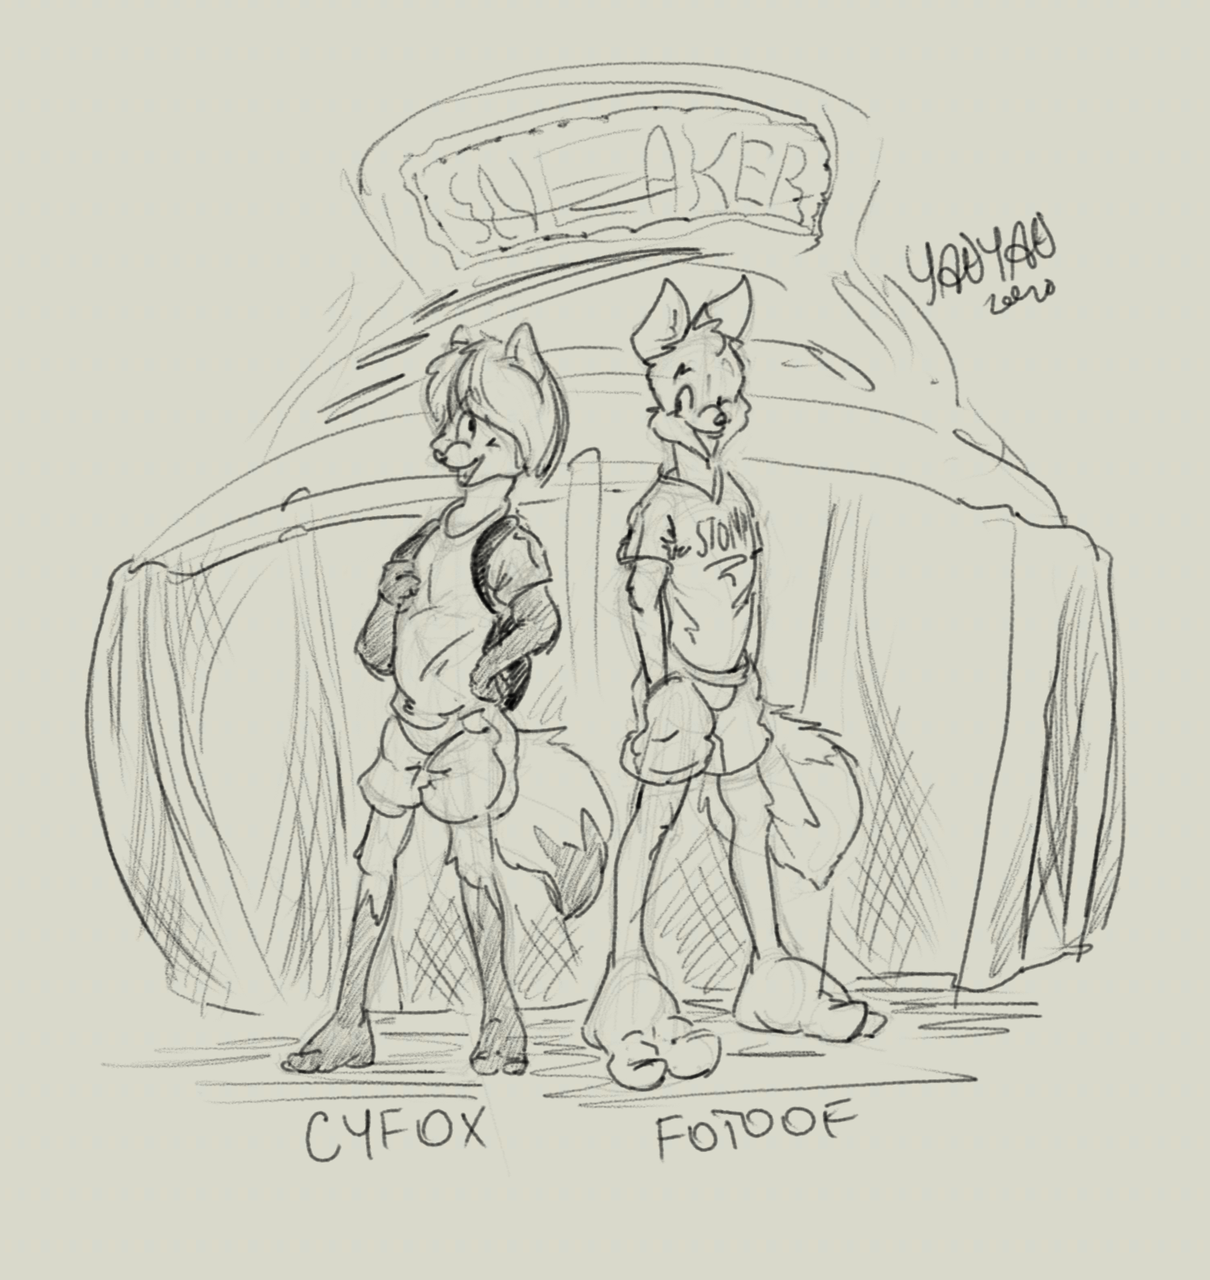 /images/characters/cyfox-fotoof.png